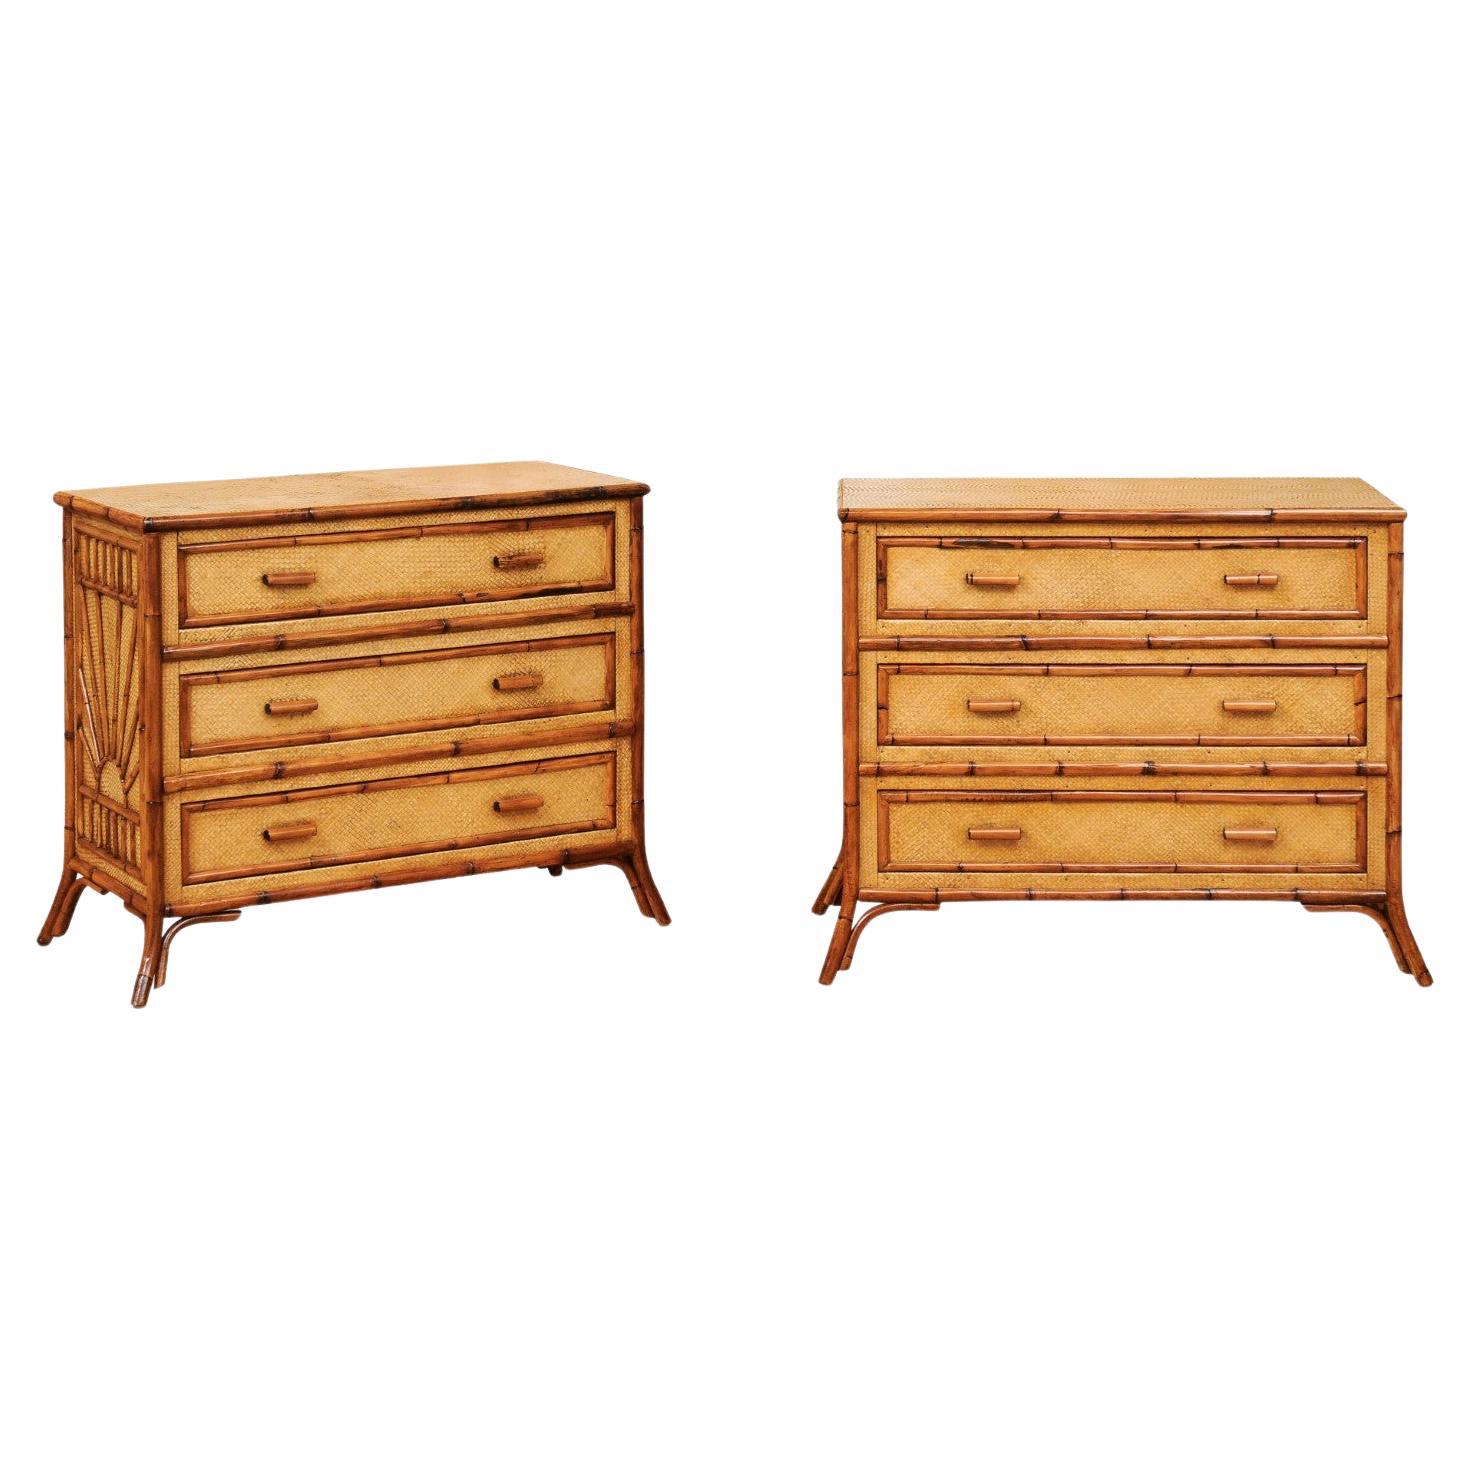 Elegant Restored Pair of Cane and Bamboo "Rising Sun" Commodes, circa 1950 For Sale